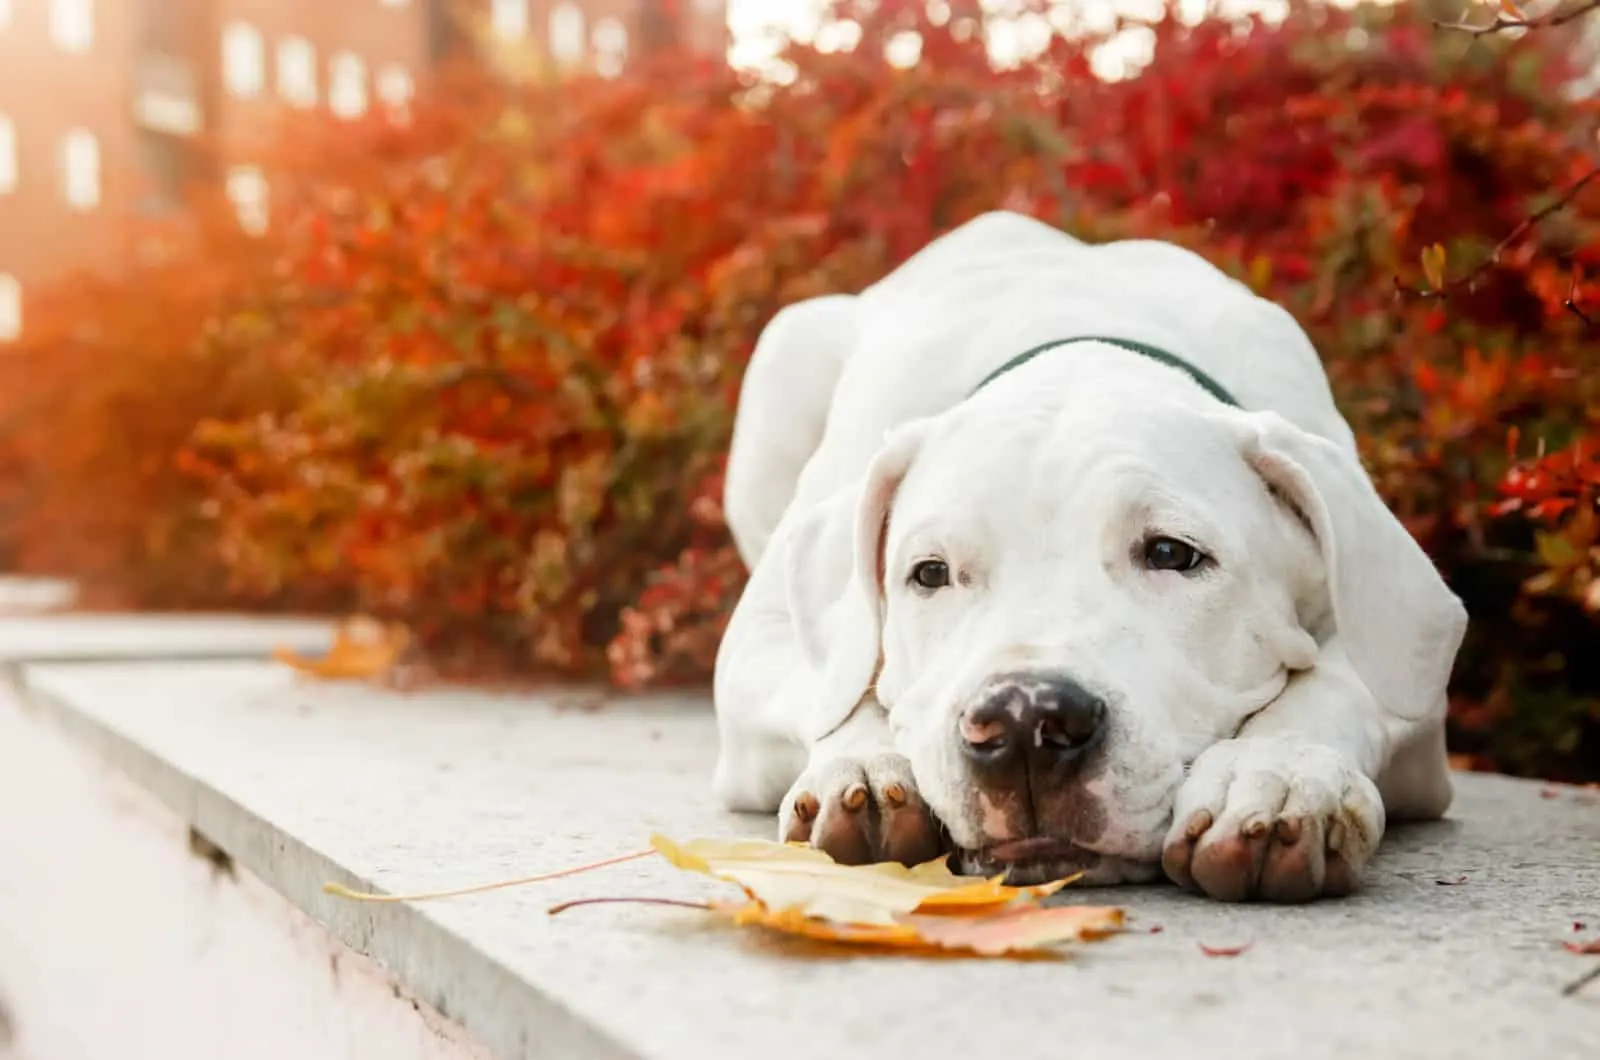 Dogo argentino lies on grass in autumn park near red leaves